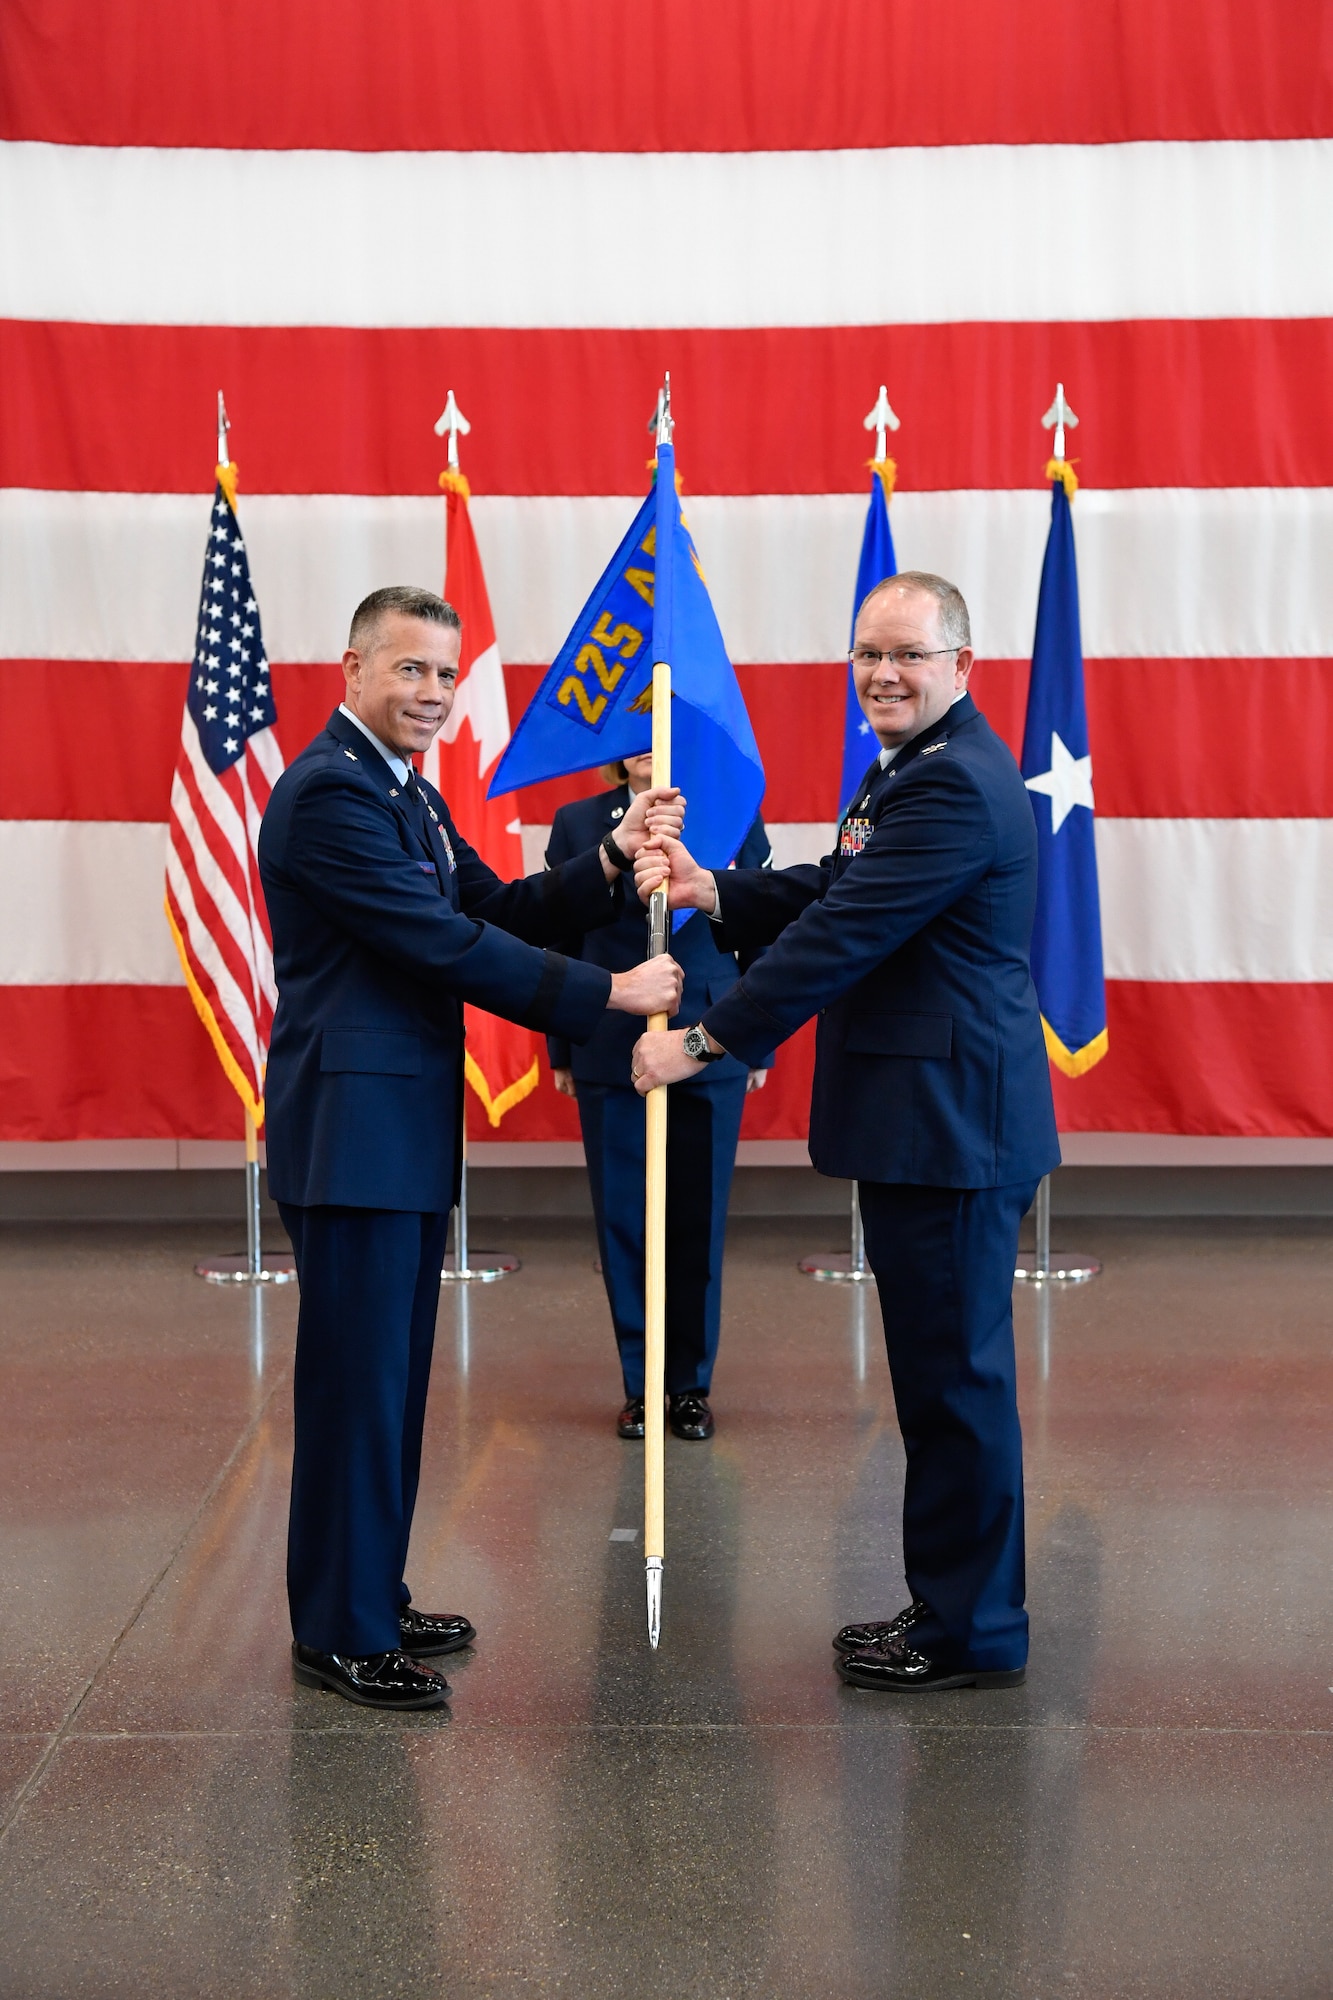 Brig. Gen. Jeremy Horn presides over the ceremony of Col. Scott Humphrey as he assumes command of the 225th Air Defense Group at the Pierce County Readiness Center, Camp Murray, Washington, April 10, 2019.  (U.S. Air National Guard photo by Capt. Colette Muller)